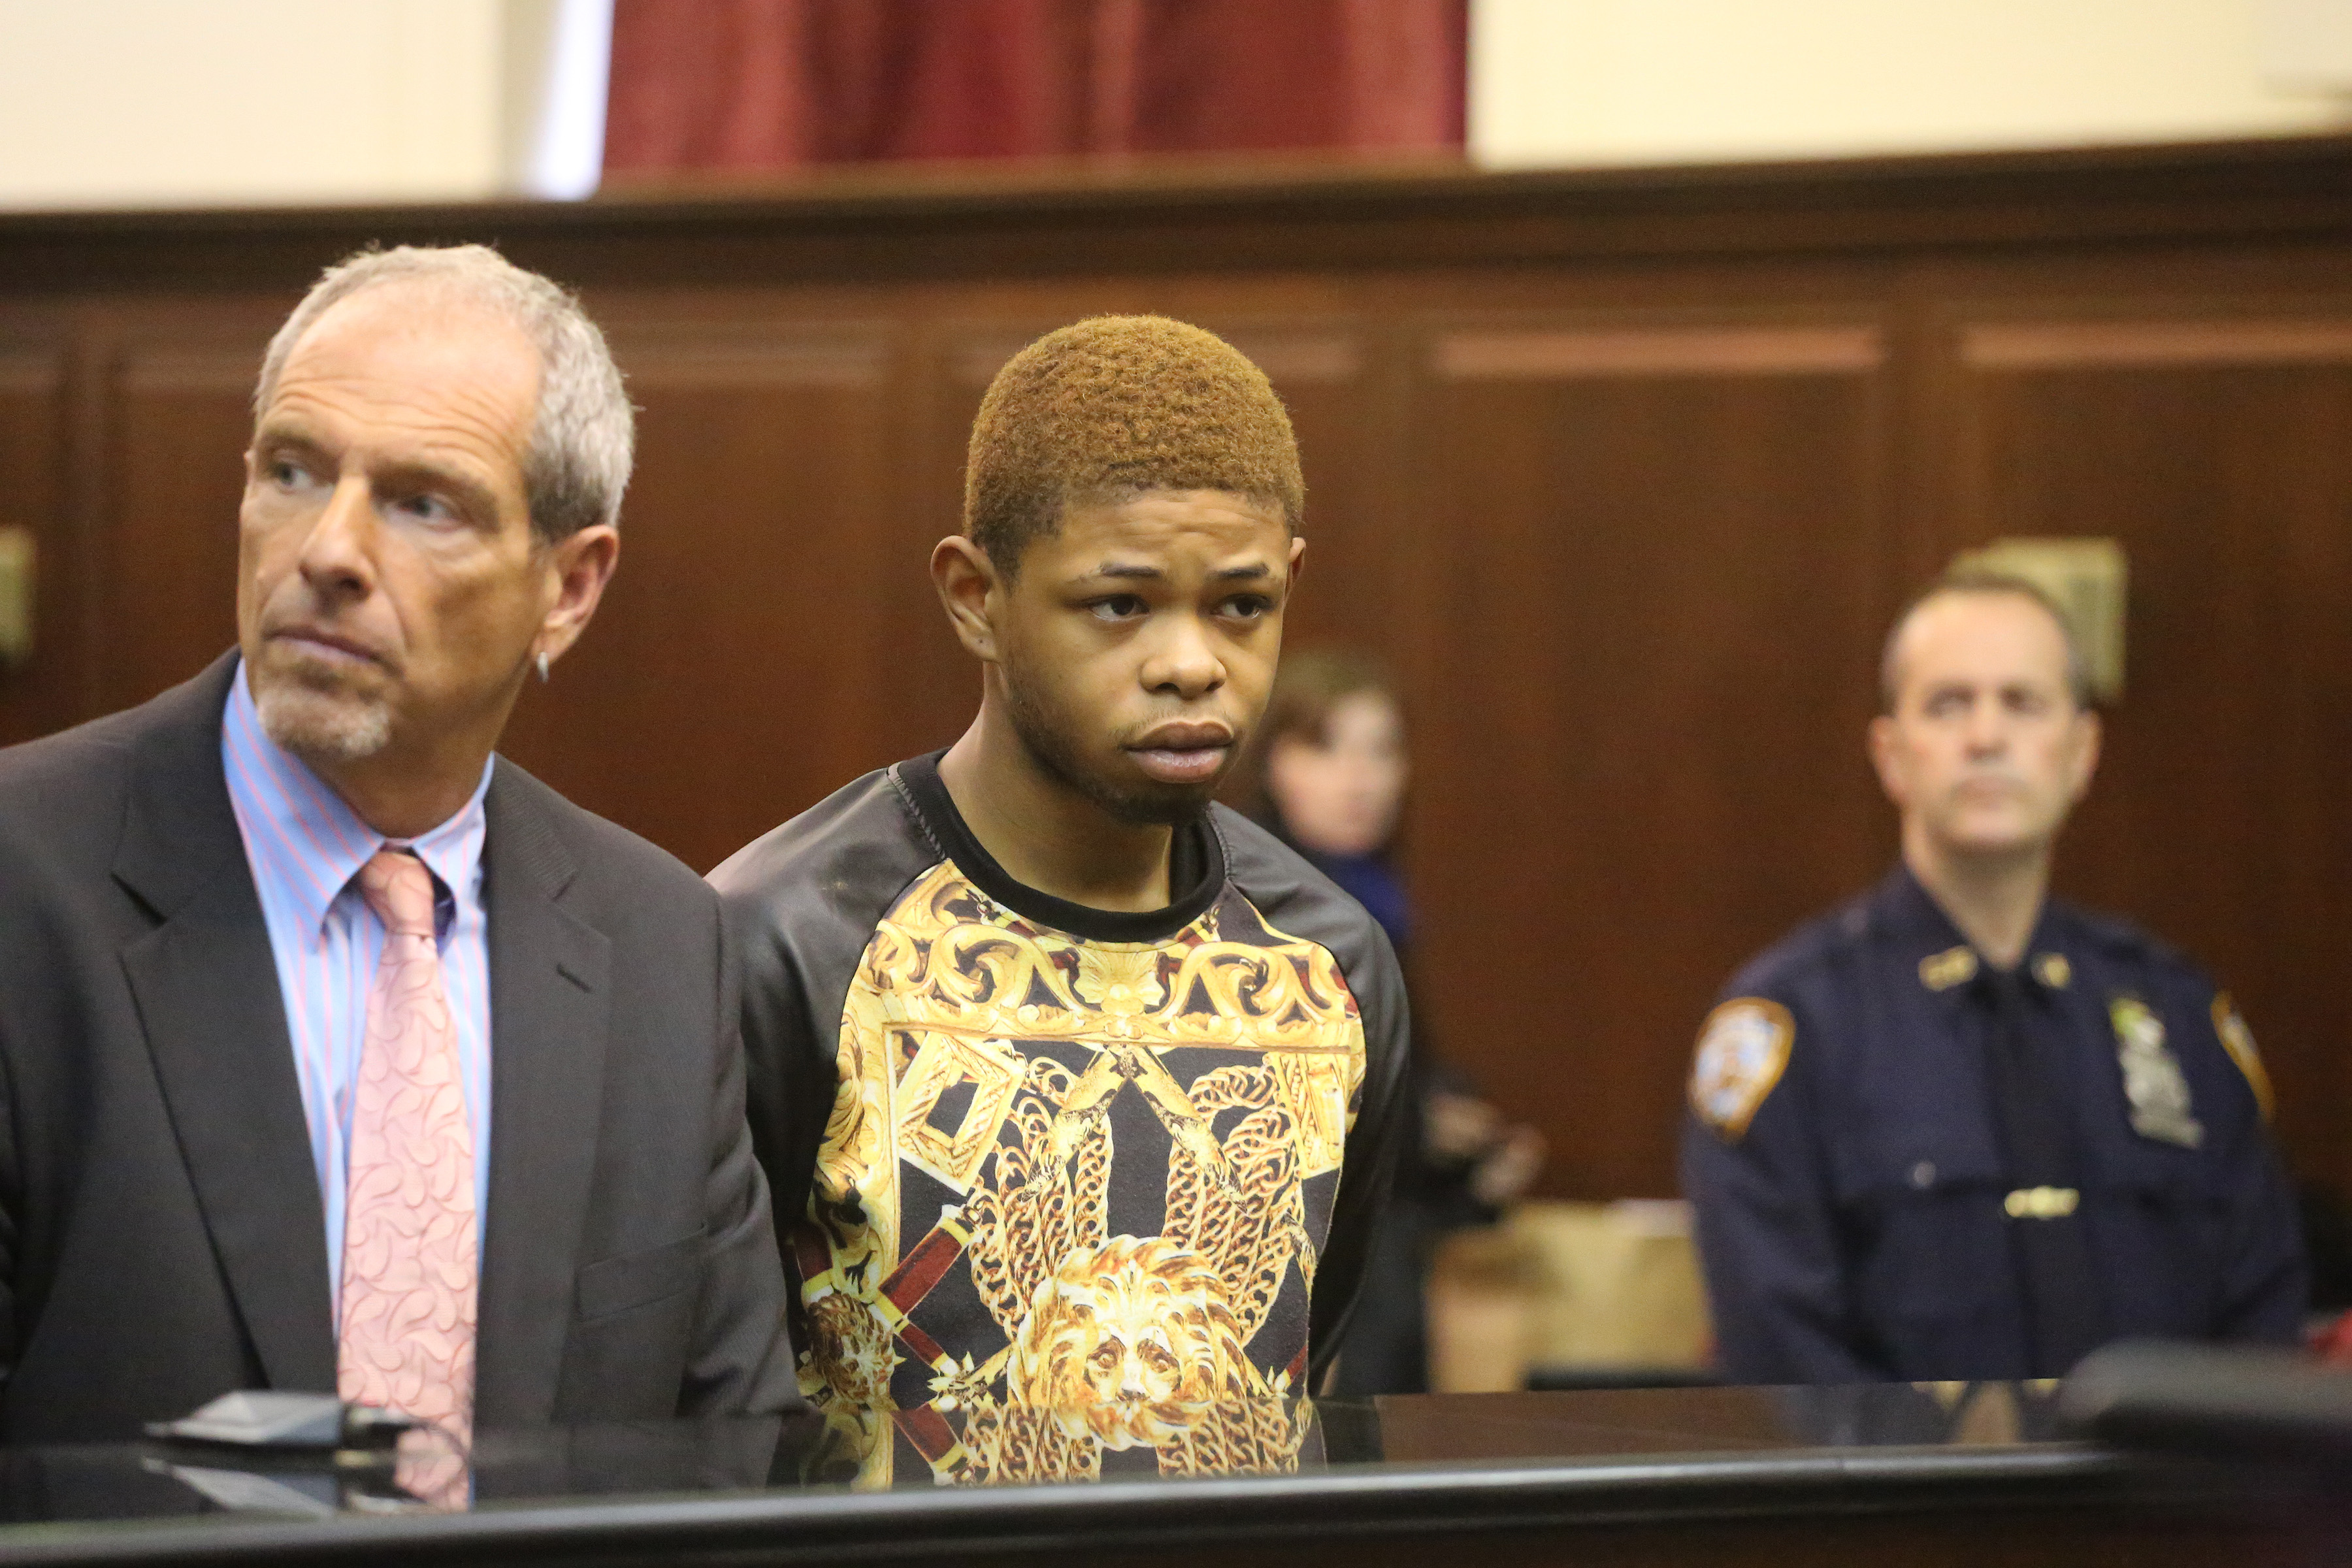 Jamie Pugh, 20, appears at his arraignment in Manhattan Criminal Court on Wed., May 14. Pugh is charged with the brutal murder of Wen Hui Ruan, 68, on E. Sixth St. near Avenue D. At left is his defense attorney, East Villager Frank Rothman.  Photo by Jefferson Siegel